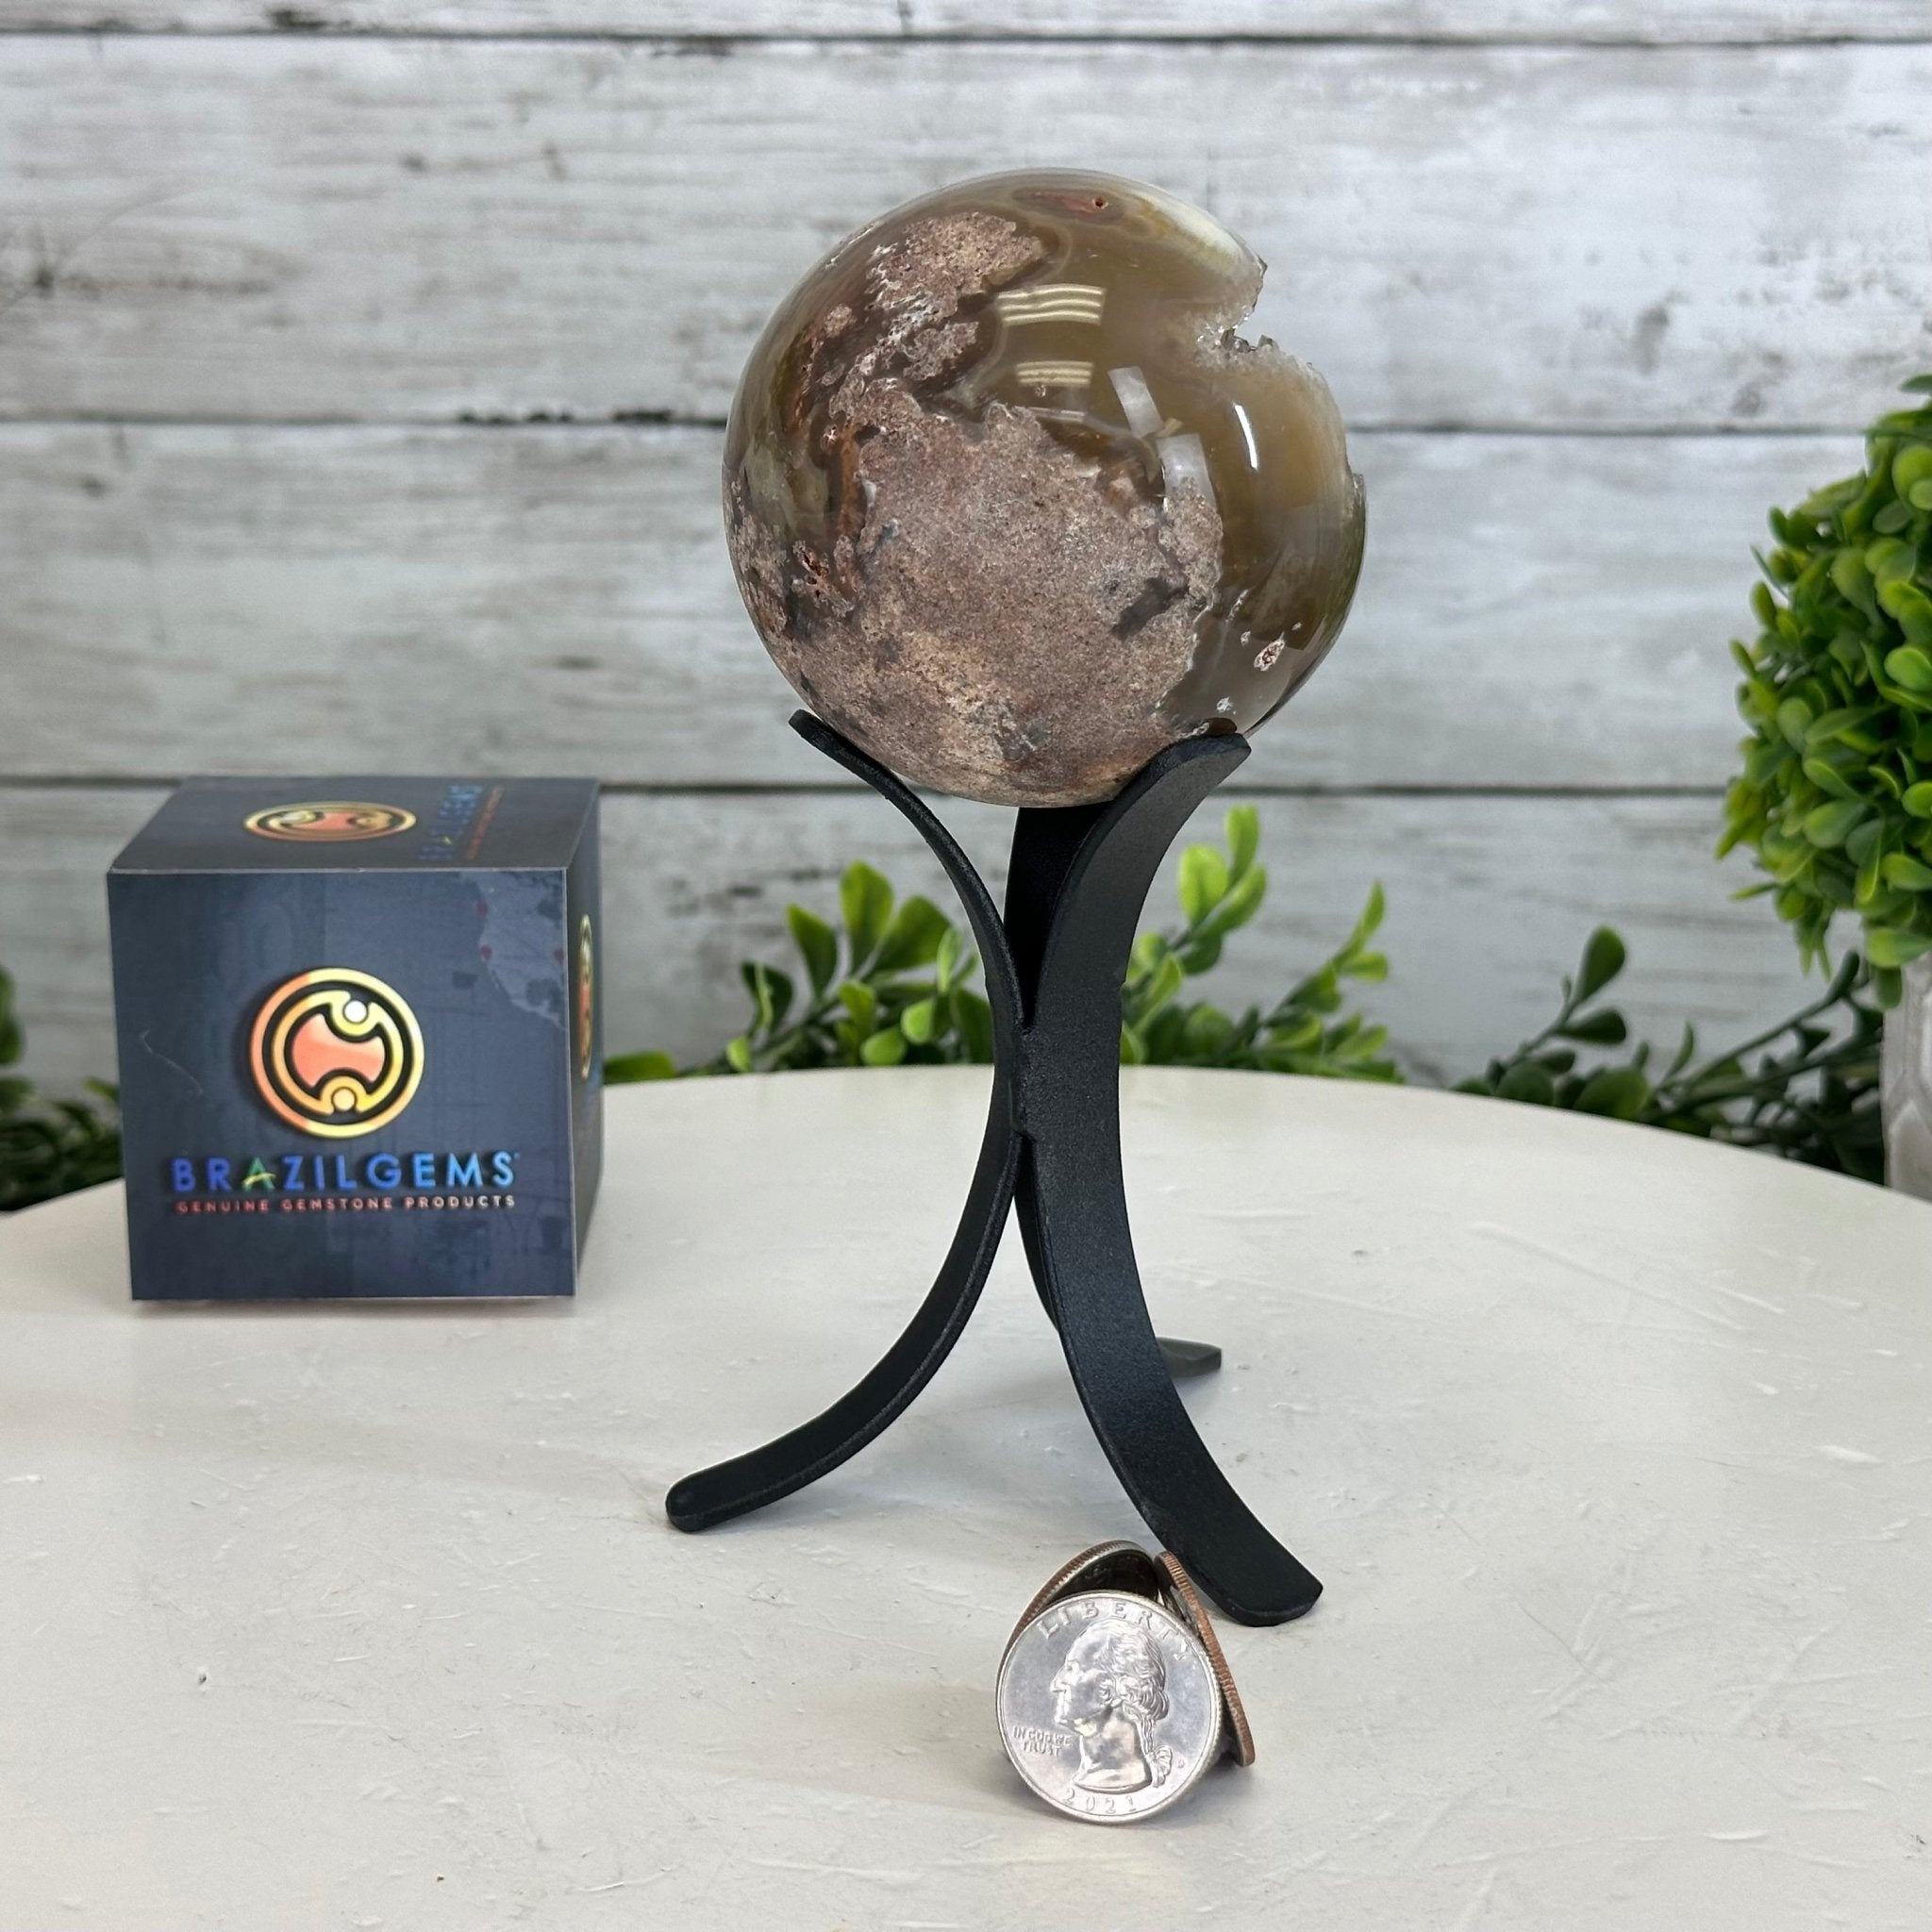 Druzy Agate Sphere on a Metal Stand, 1.2 lbs & 6.6" Tall #5634-0005 - Brazil GemsBrazil GemsDruzy Agate Sphere on a Metal Stand, 1.2 lbs & 6.6" Tall #5634-0005Spheres5634-0005